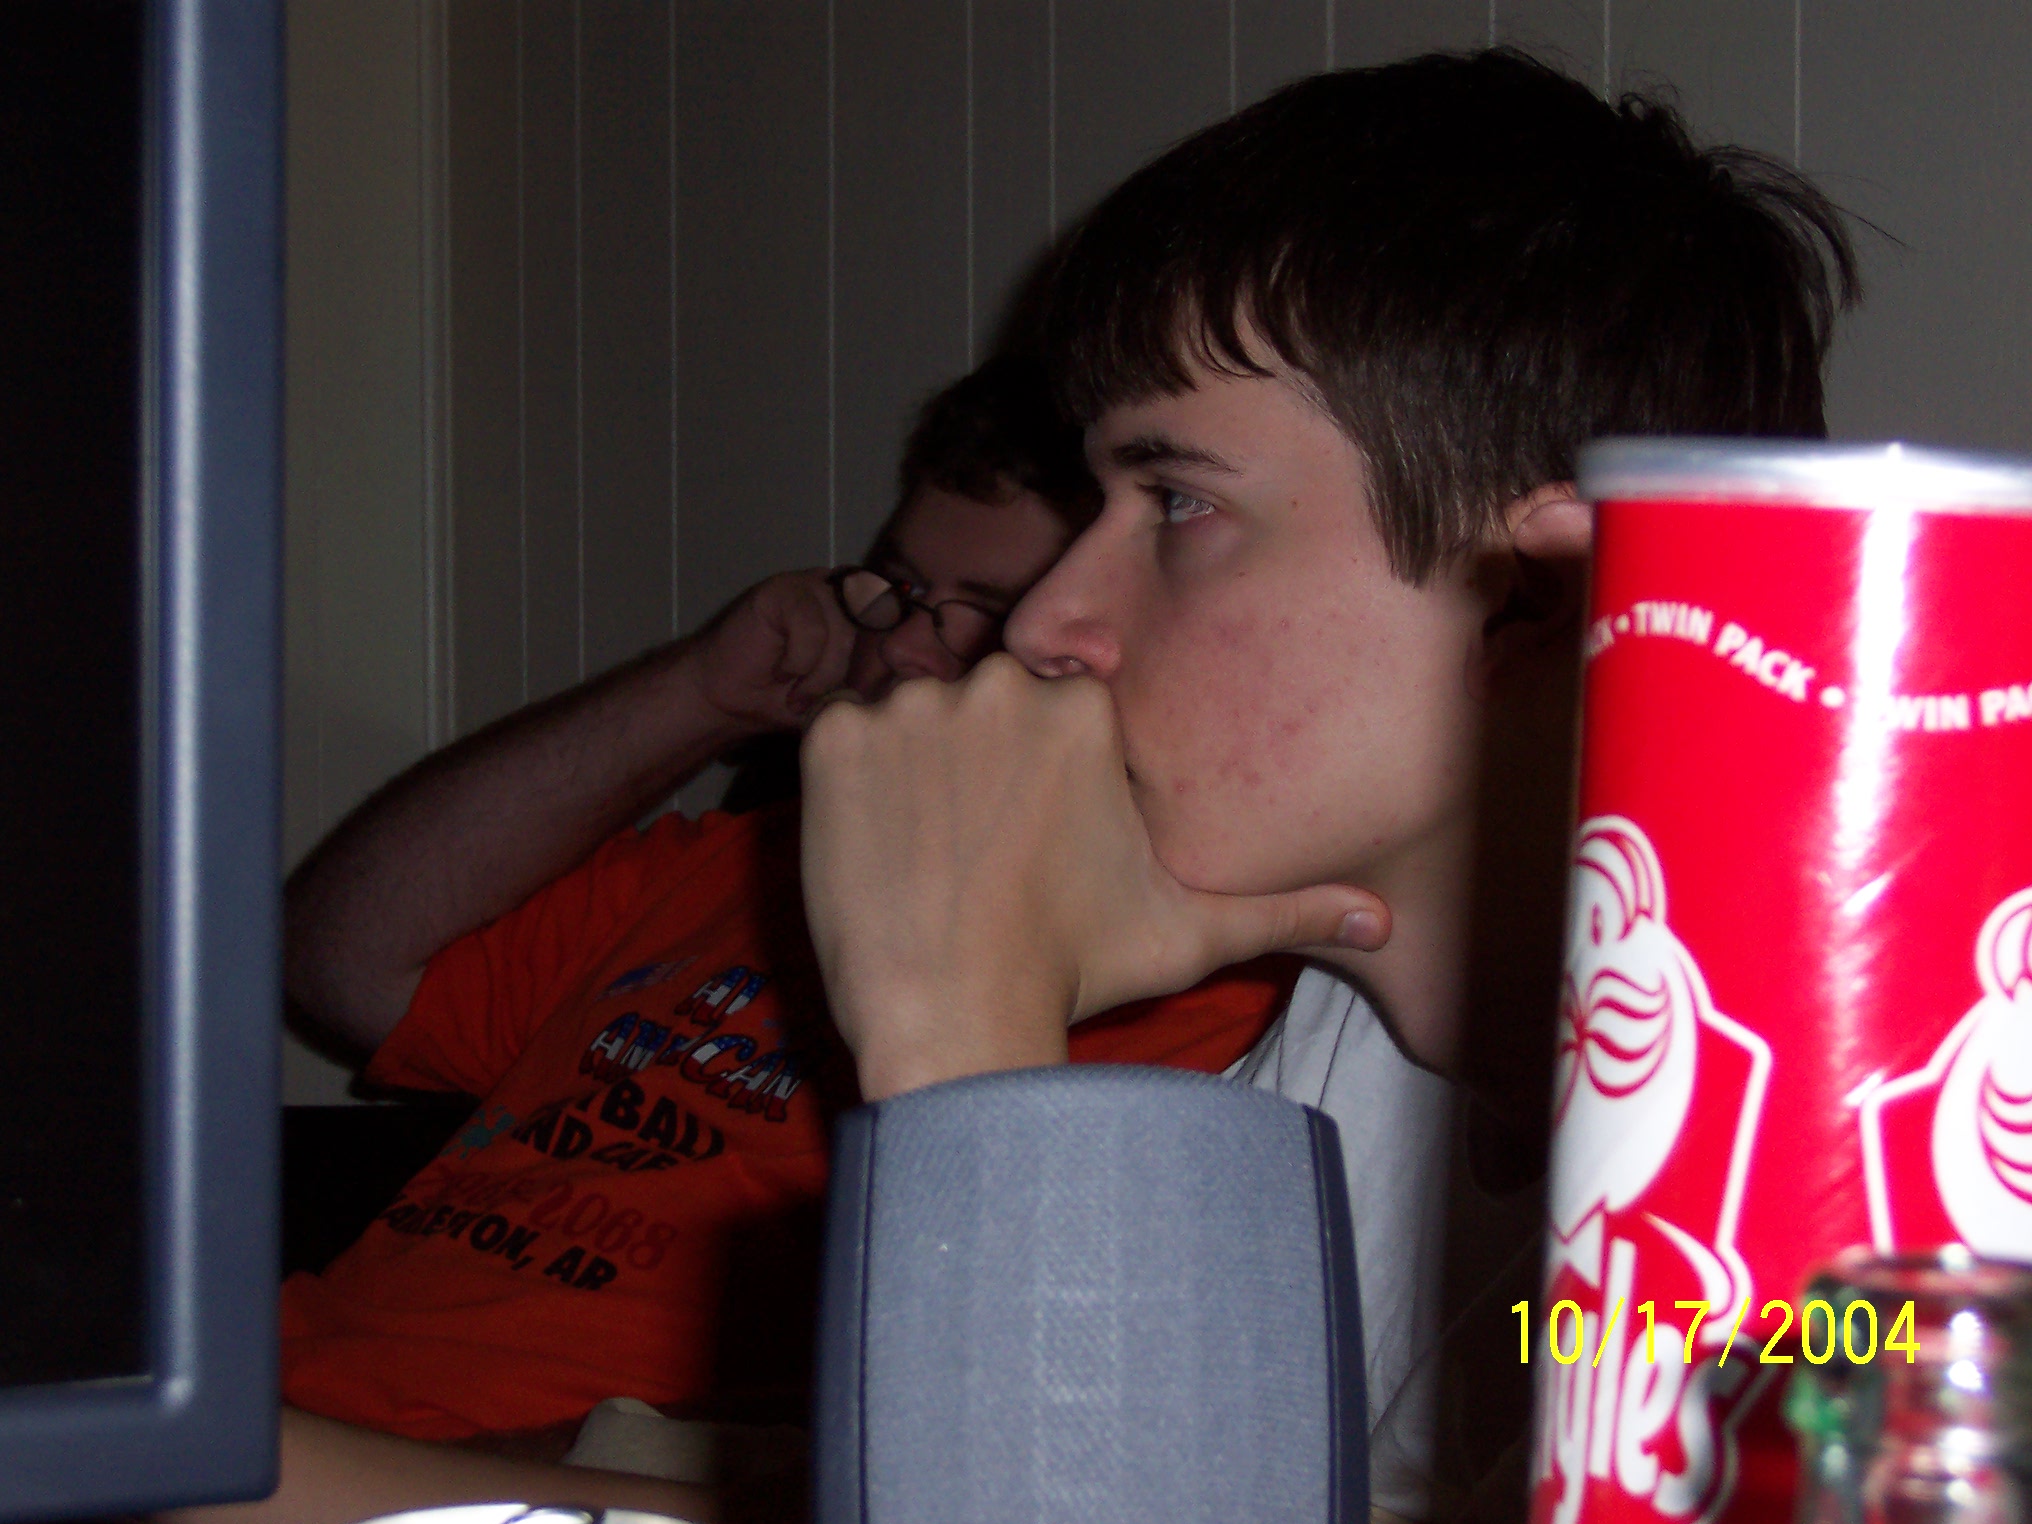 ebay and his Pringles can, and he still can't get on the wireless network =)